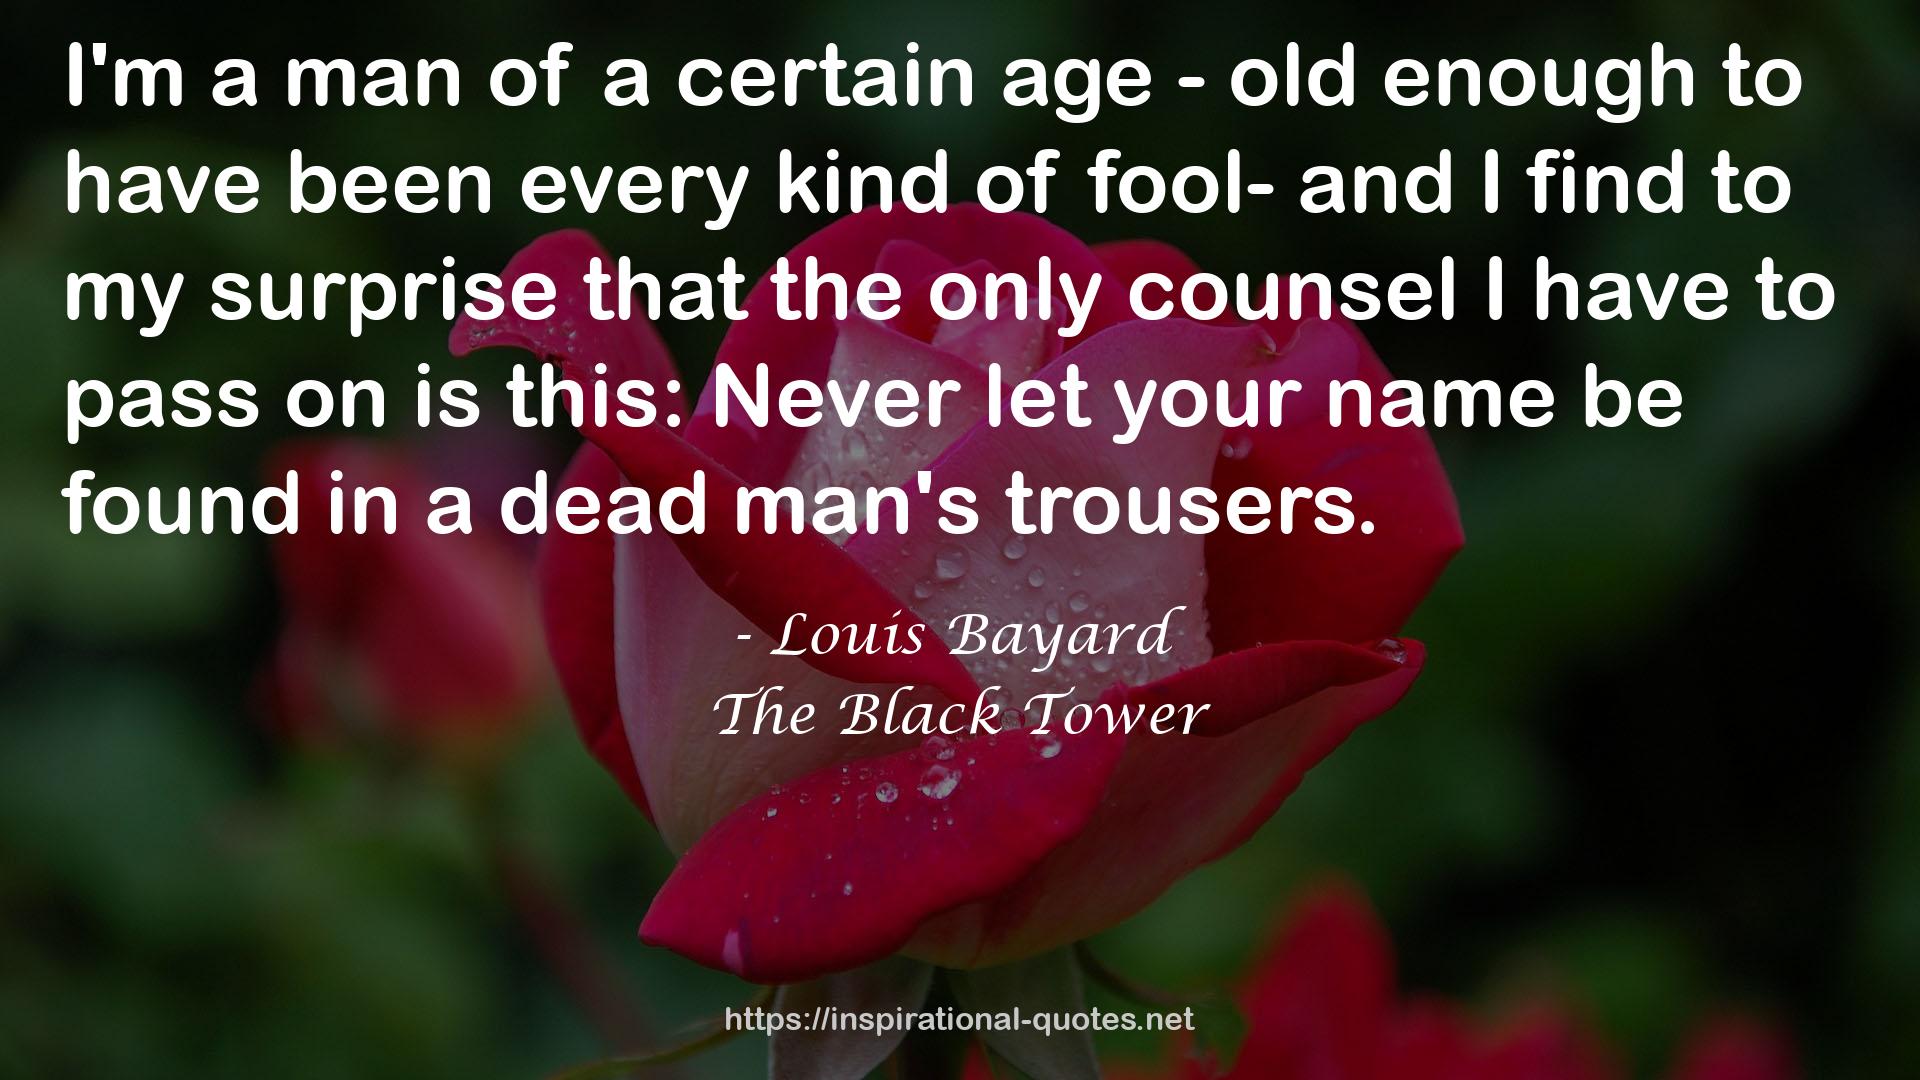 The Black Tower QUOTES